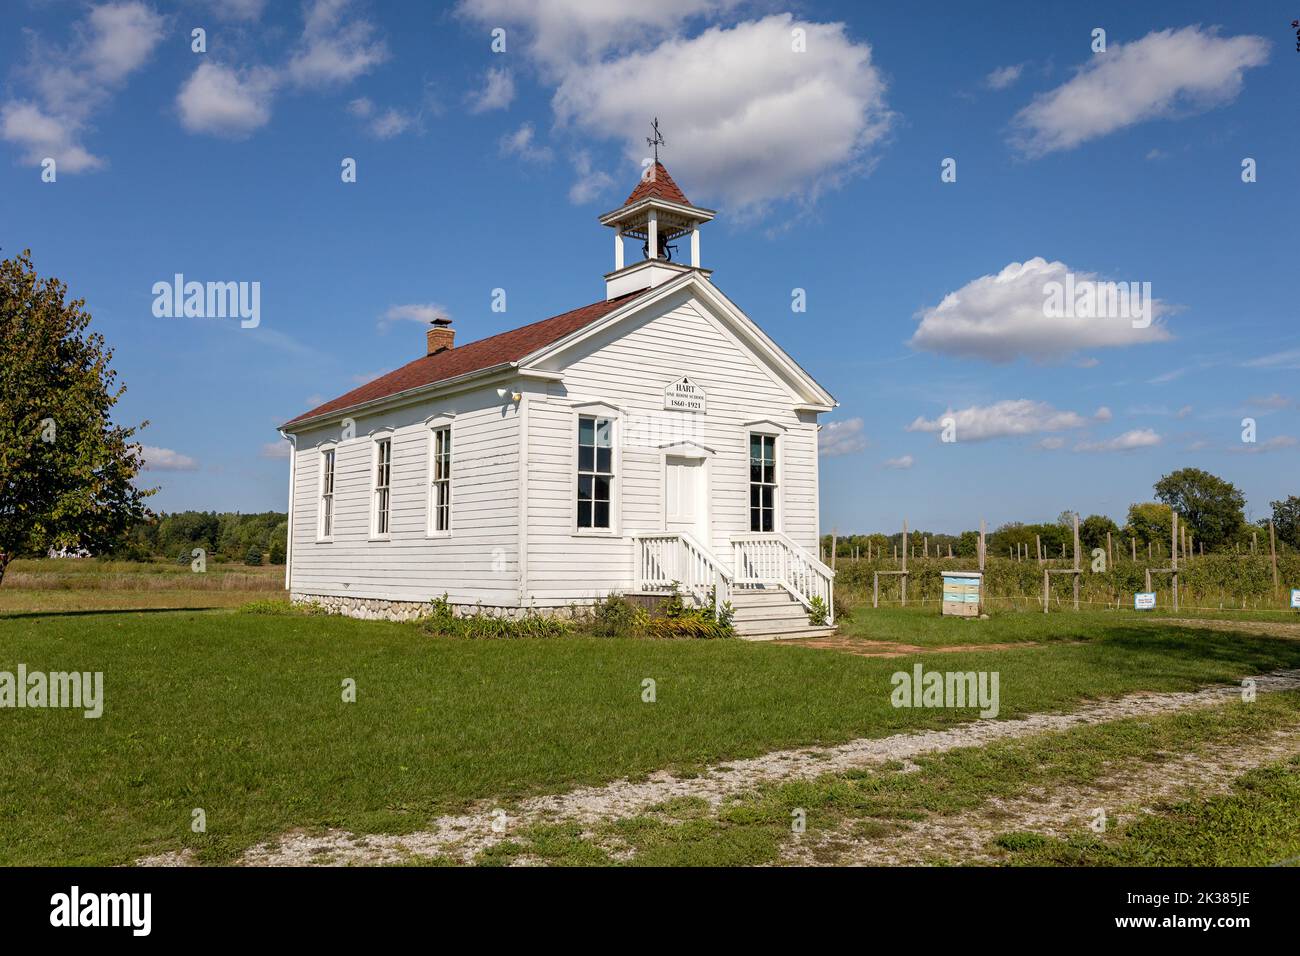 The Hart One Room School Schoolhouse In Frankenmuth Michigan Built In 1860 In A Rural Area Outside Frankenmuth In Michigan America Stock Photo